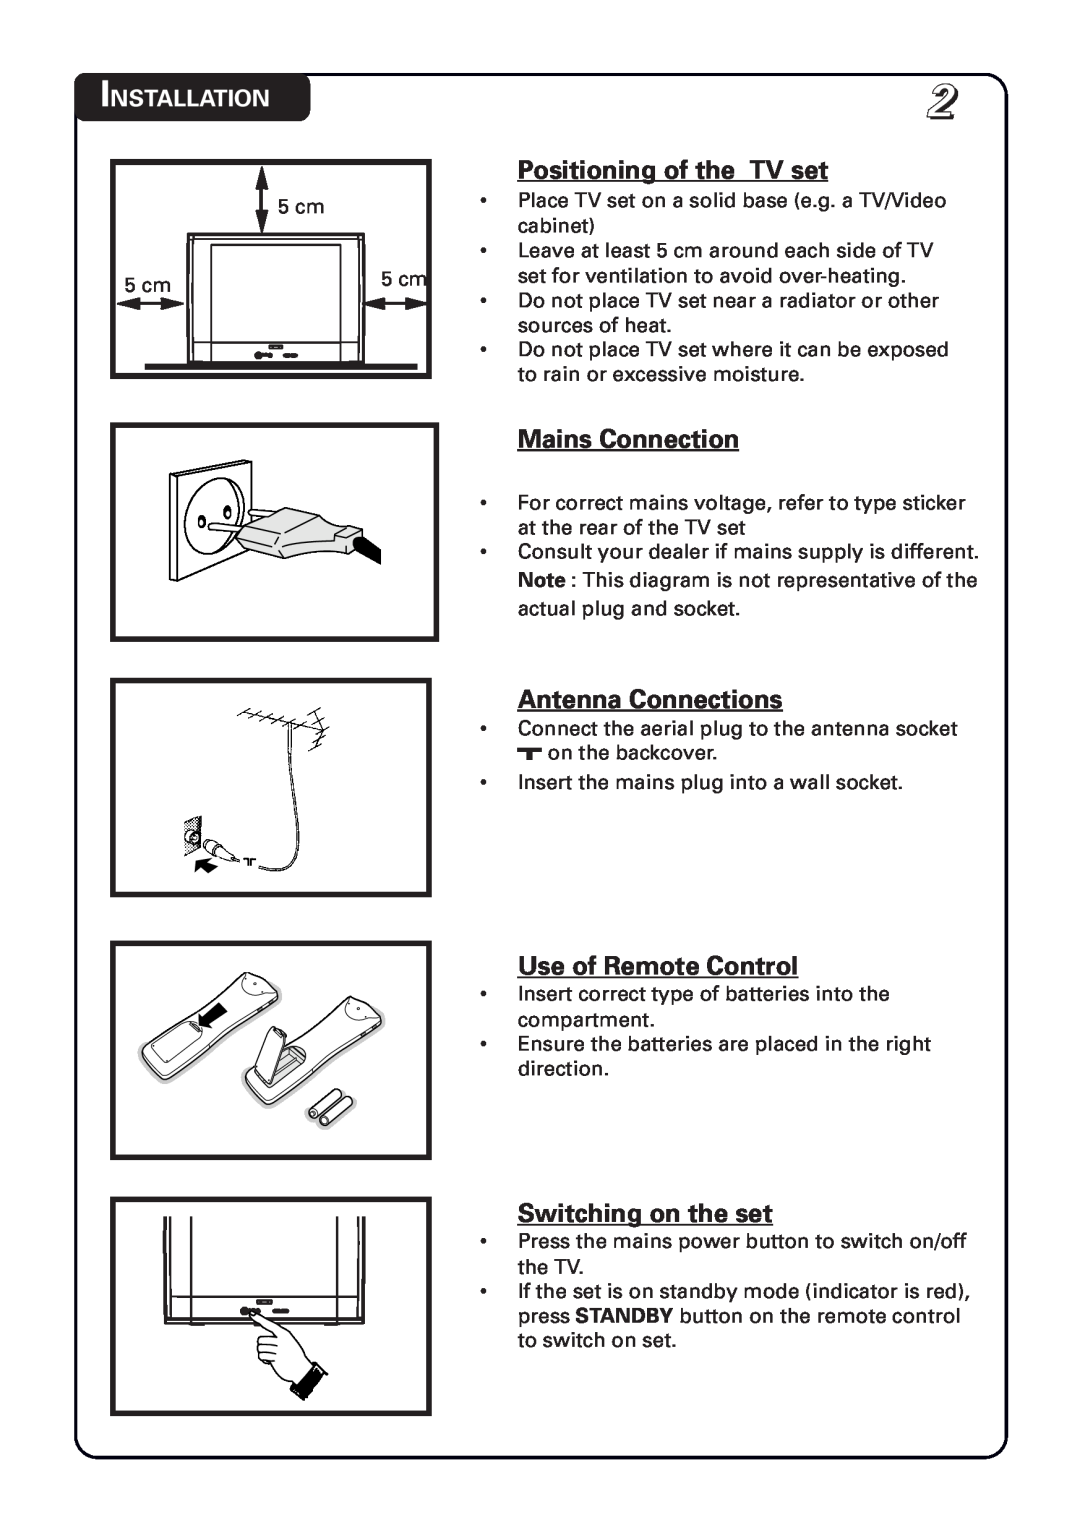 Philips 14PT1582 Positioning of the TV set, Mains Connection, Antenna Connections, Use of Remote Control, Installation 